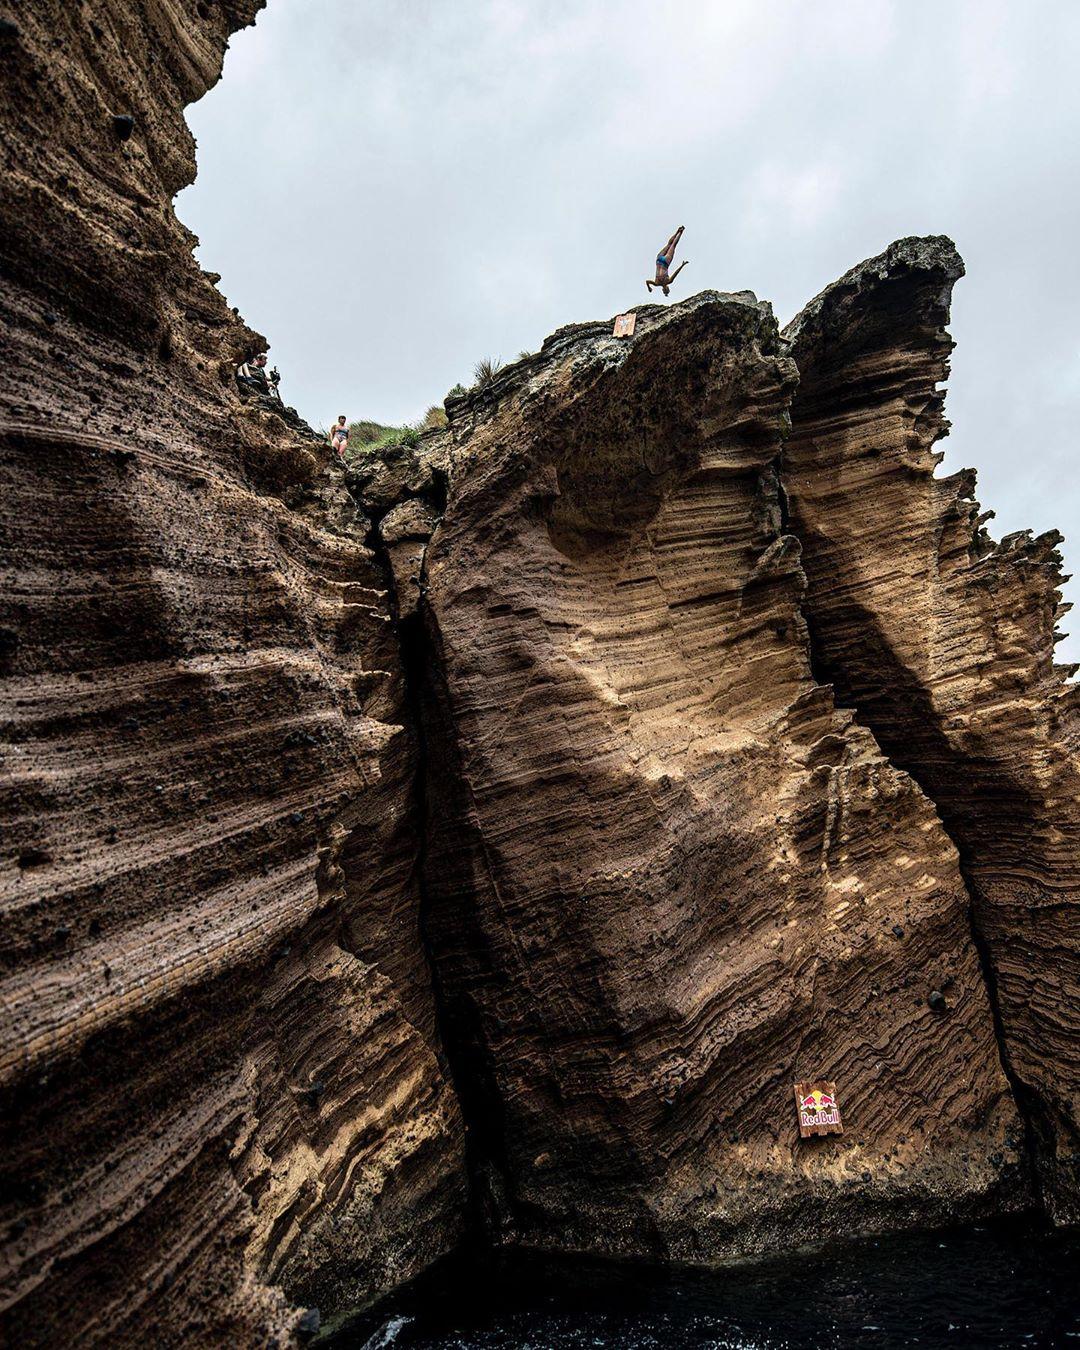 Red Bull Cliff Diving World Series in Sao Miguel, Azores